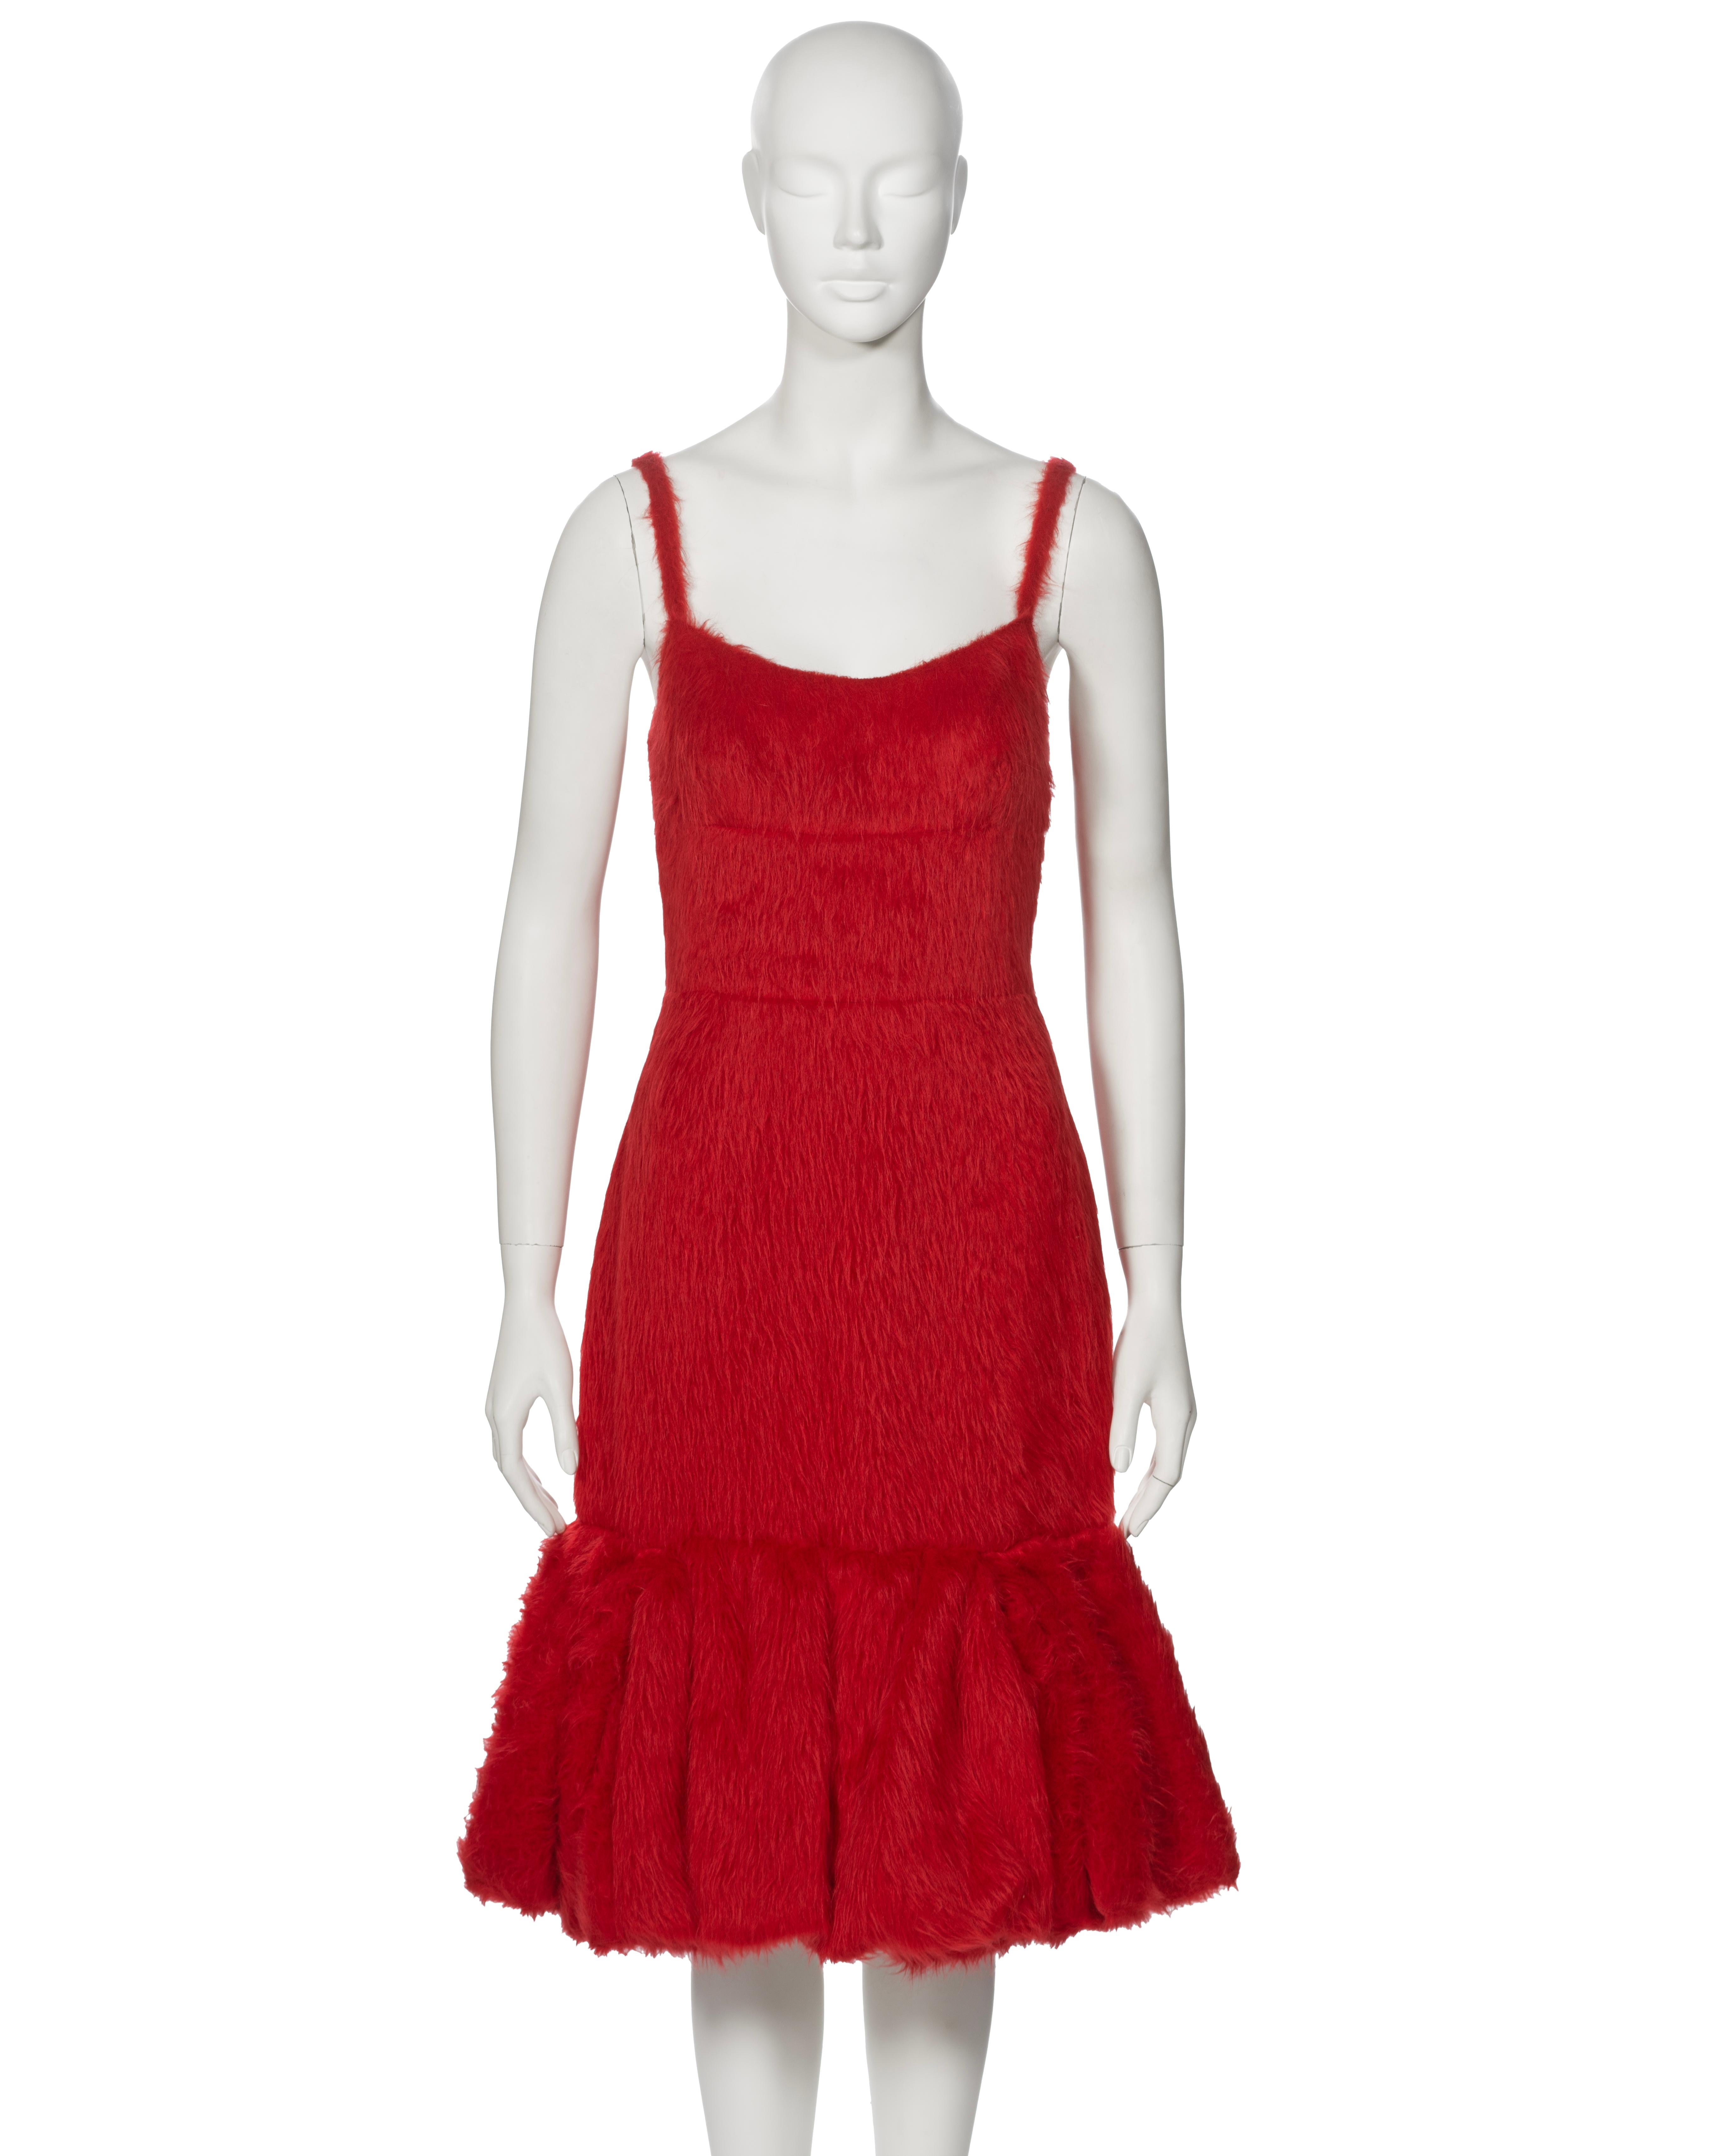 Prada by Miuccia Prada Red Brushed Alpaca Silk Cocktail Dress, fw 2017 In Excellent Condition For Sale In London, GB